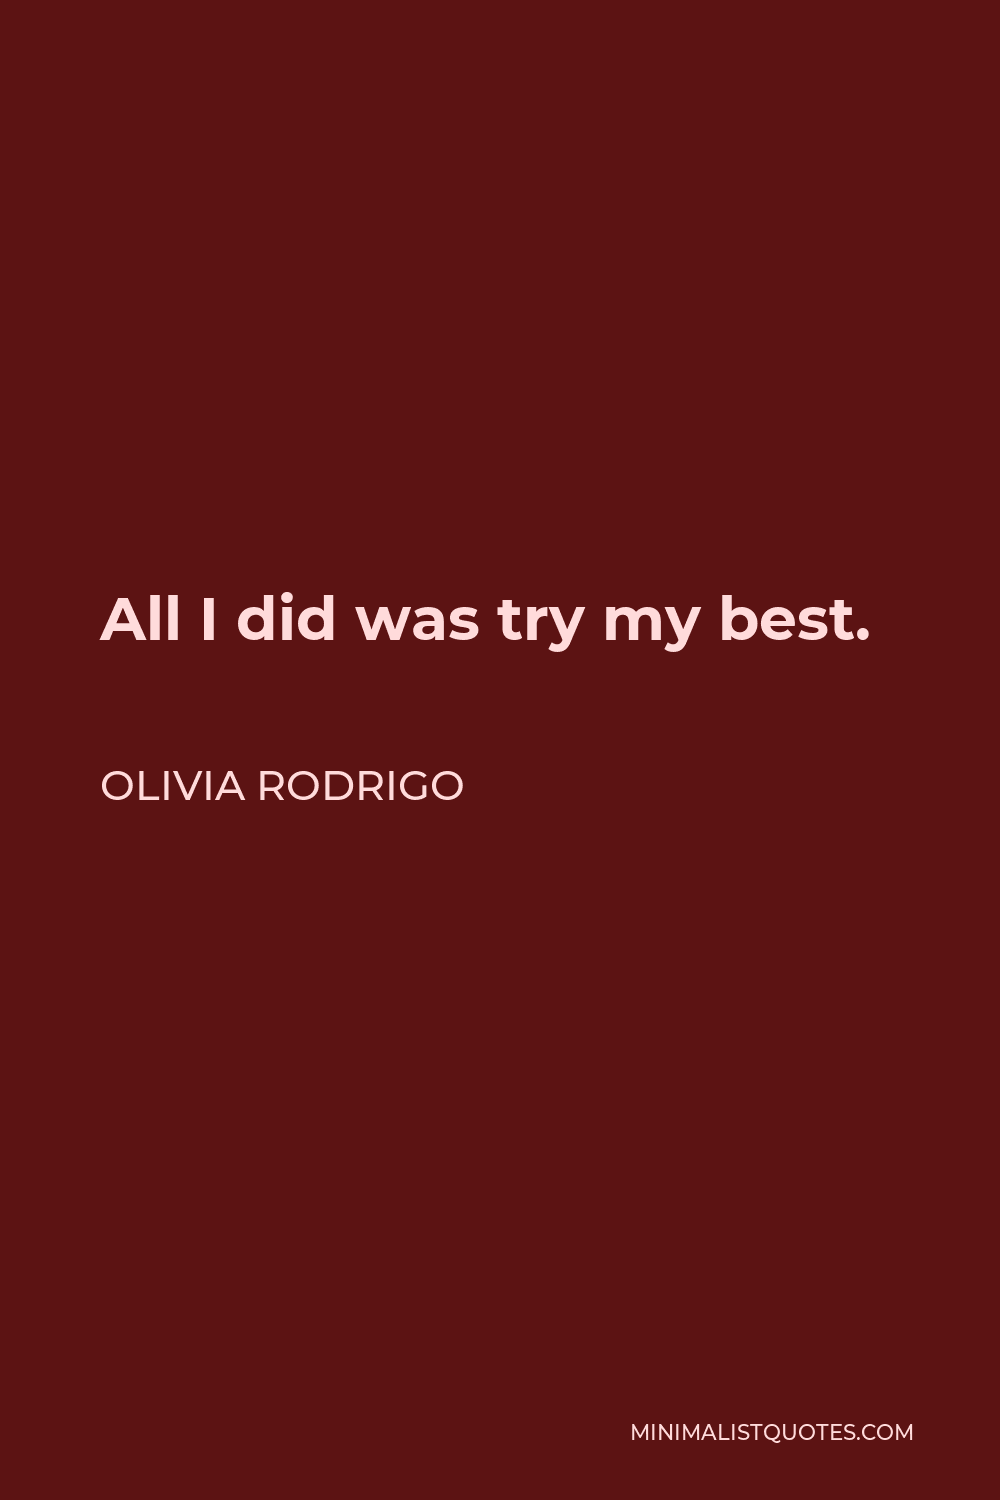 Olivia Rodrigo Quote - All I did was try my best.